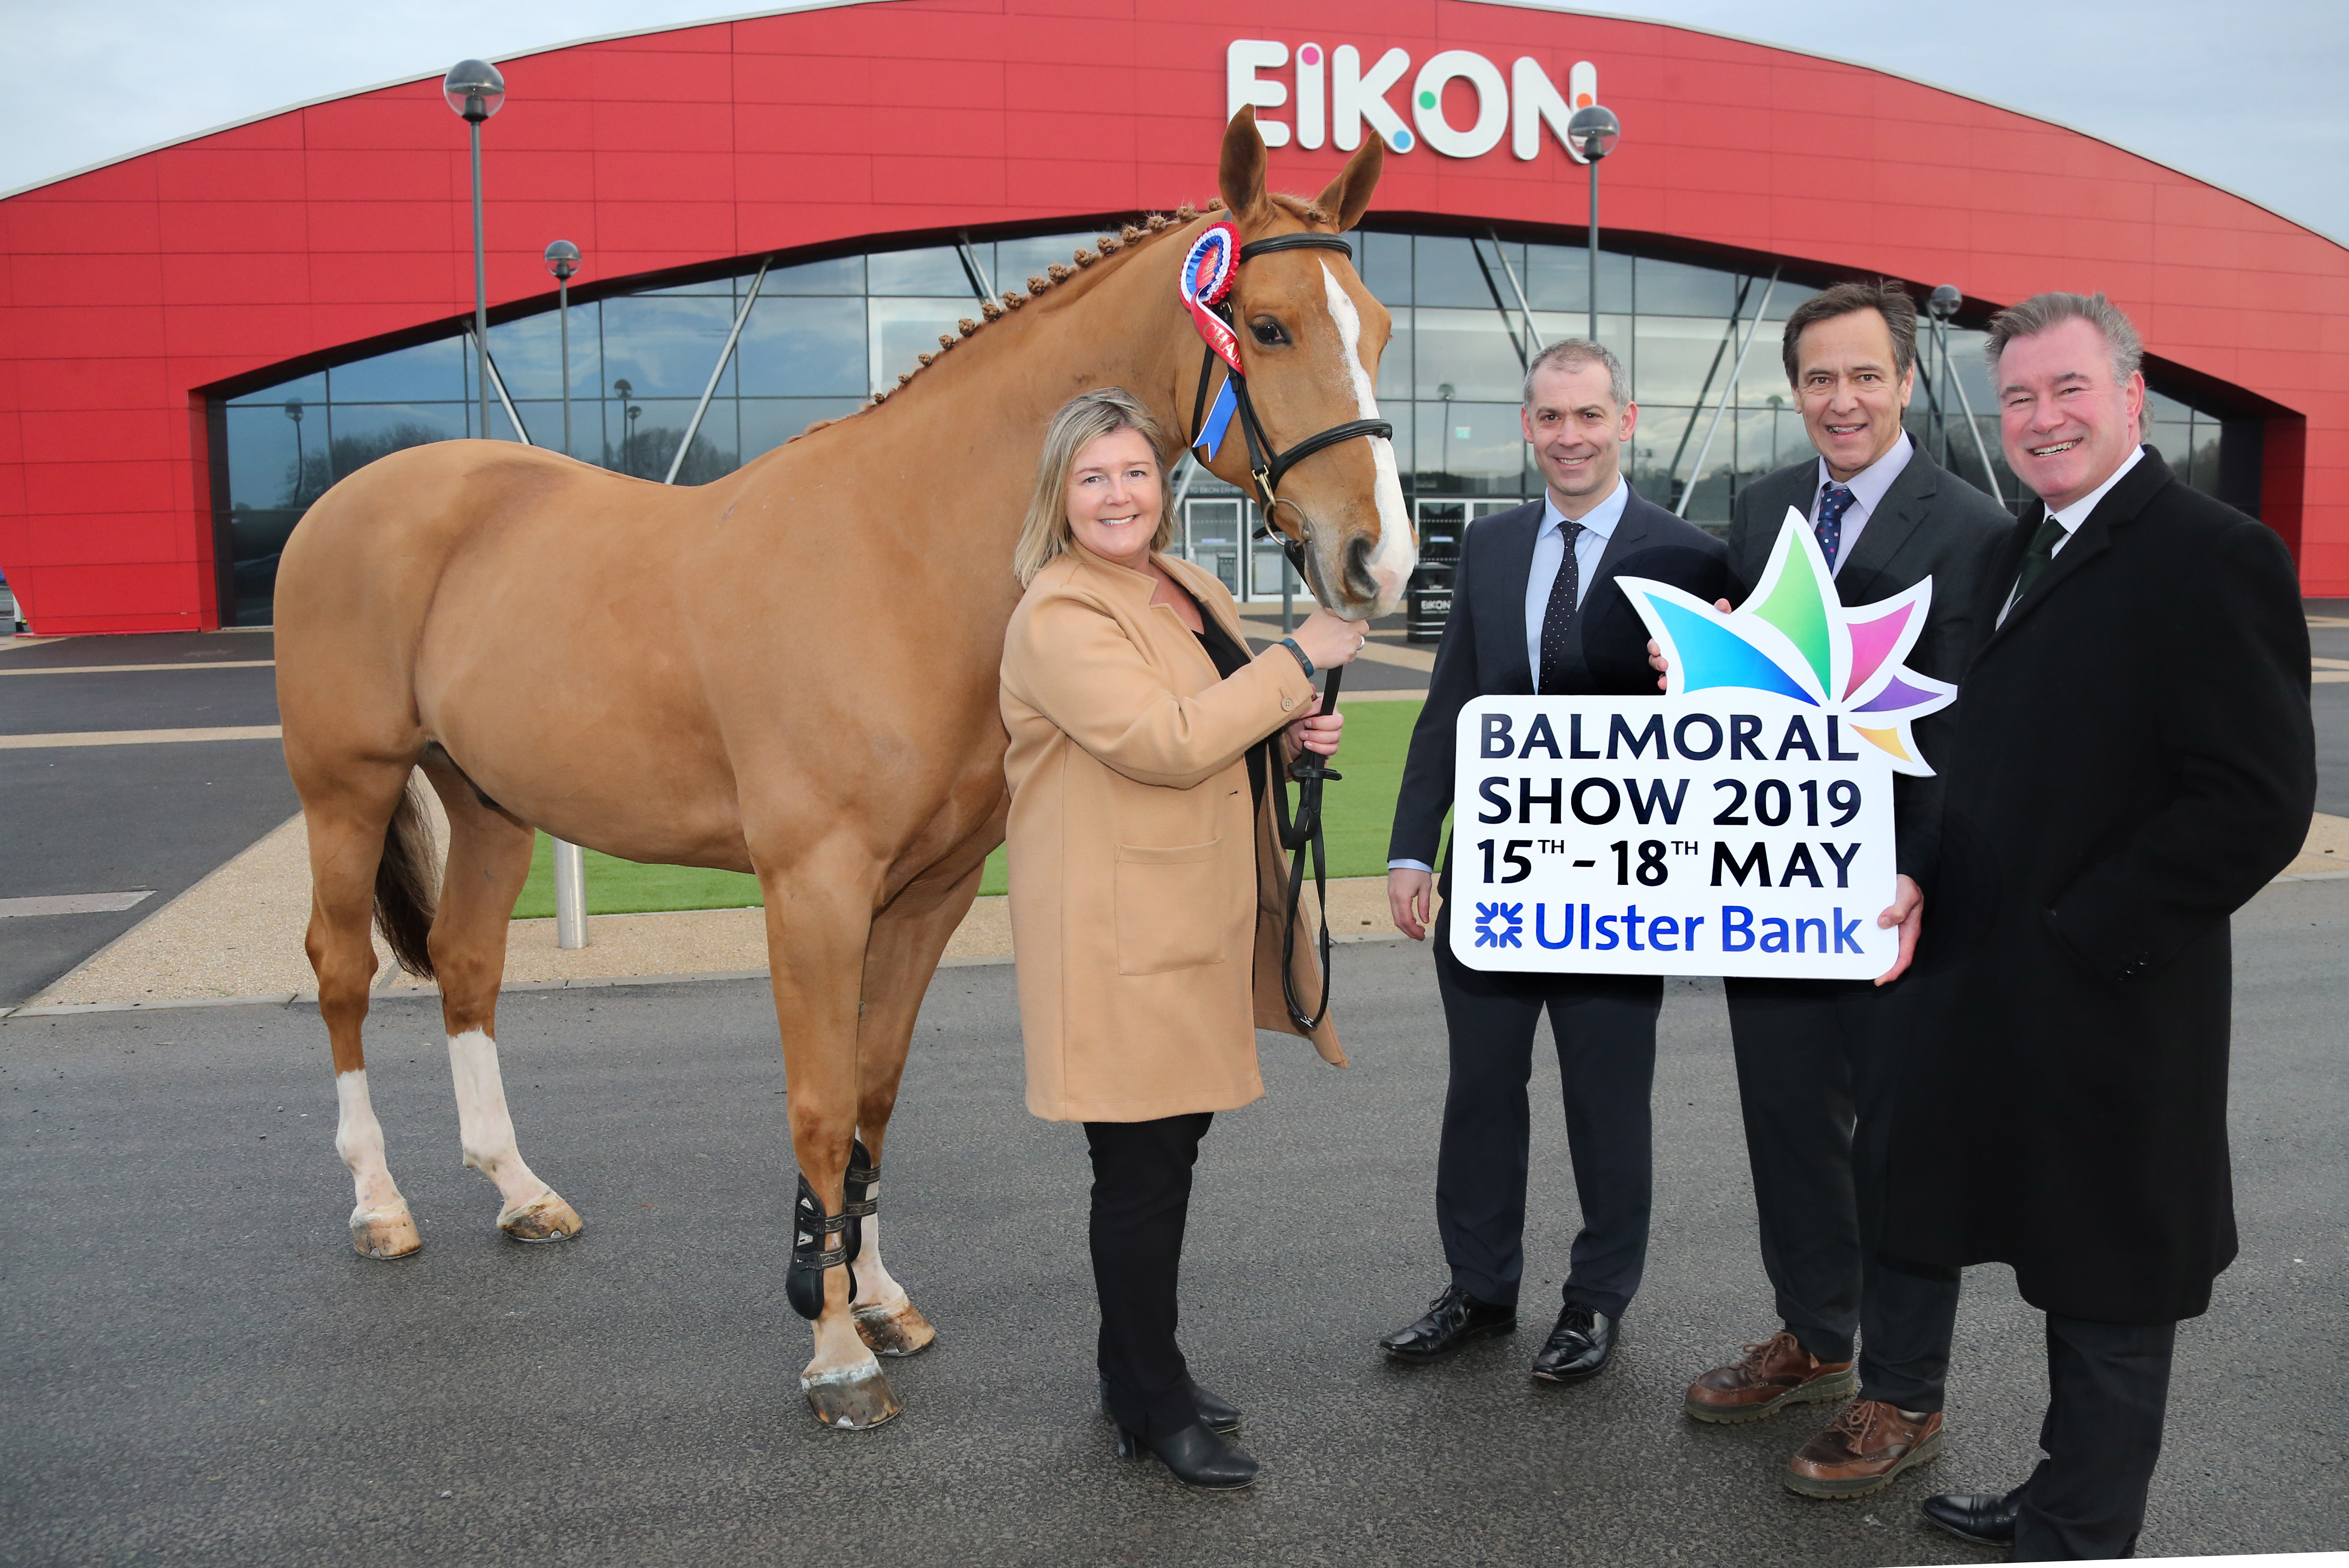 2019 Balmoral Show launches with new attractions